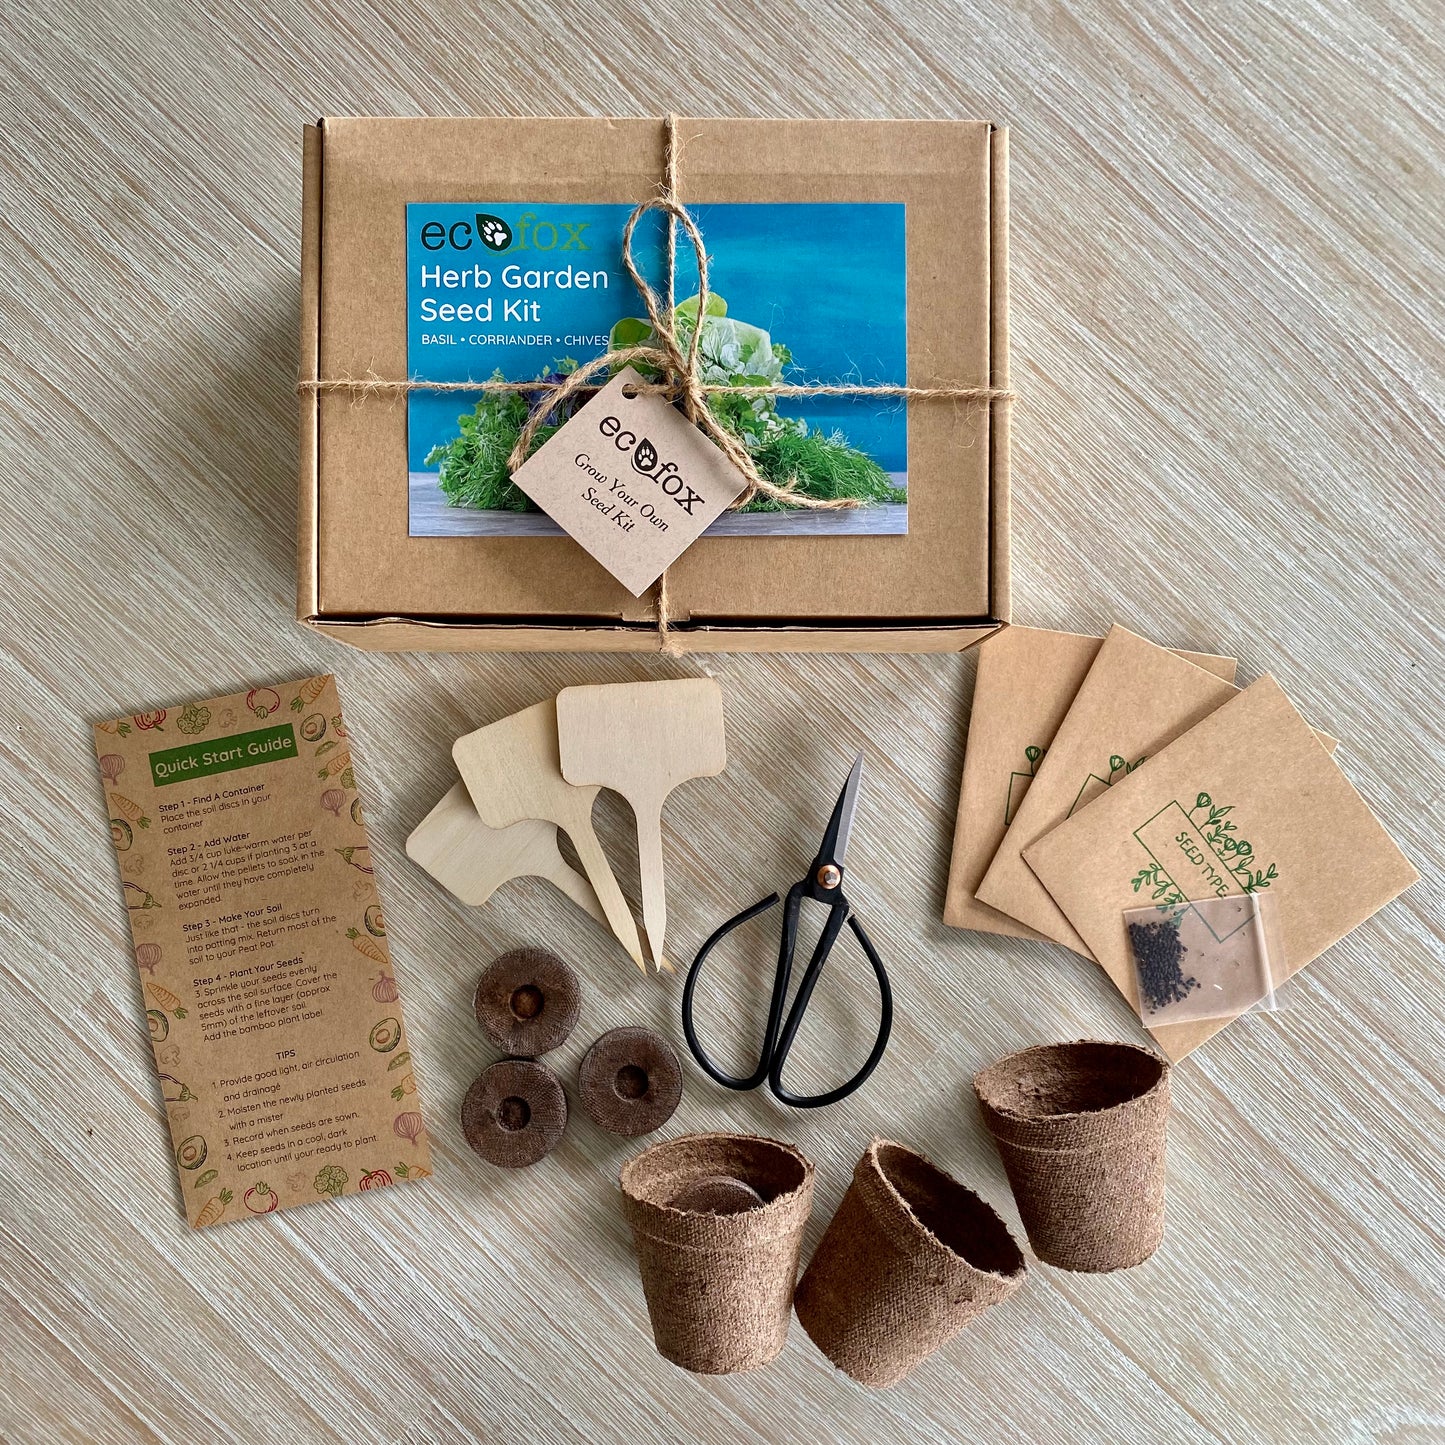 Eco Fox grow your own seed kits make the perfect gift. They include all you need to start your own mini garden. They are made up of a range of biodegradable and recyclable products.